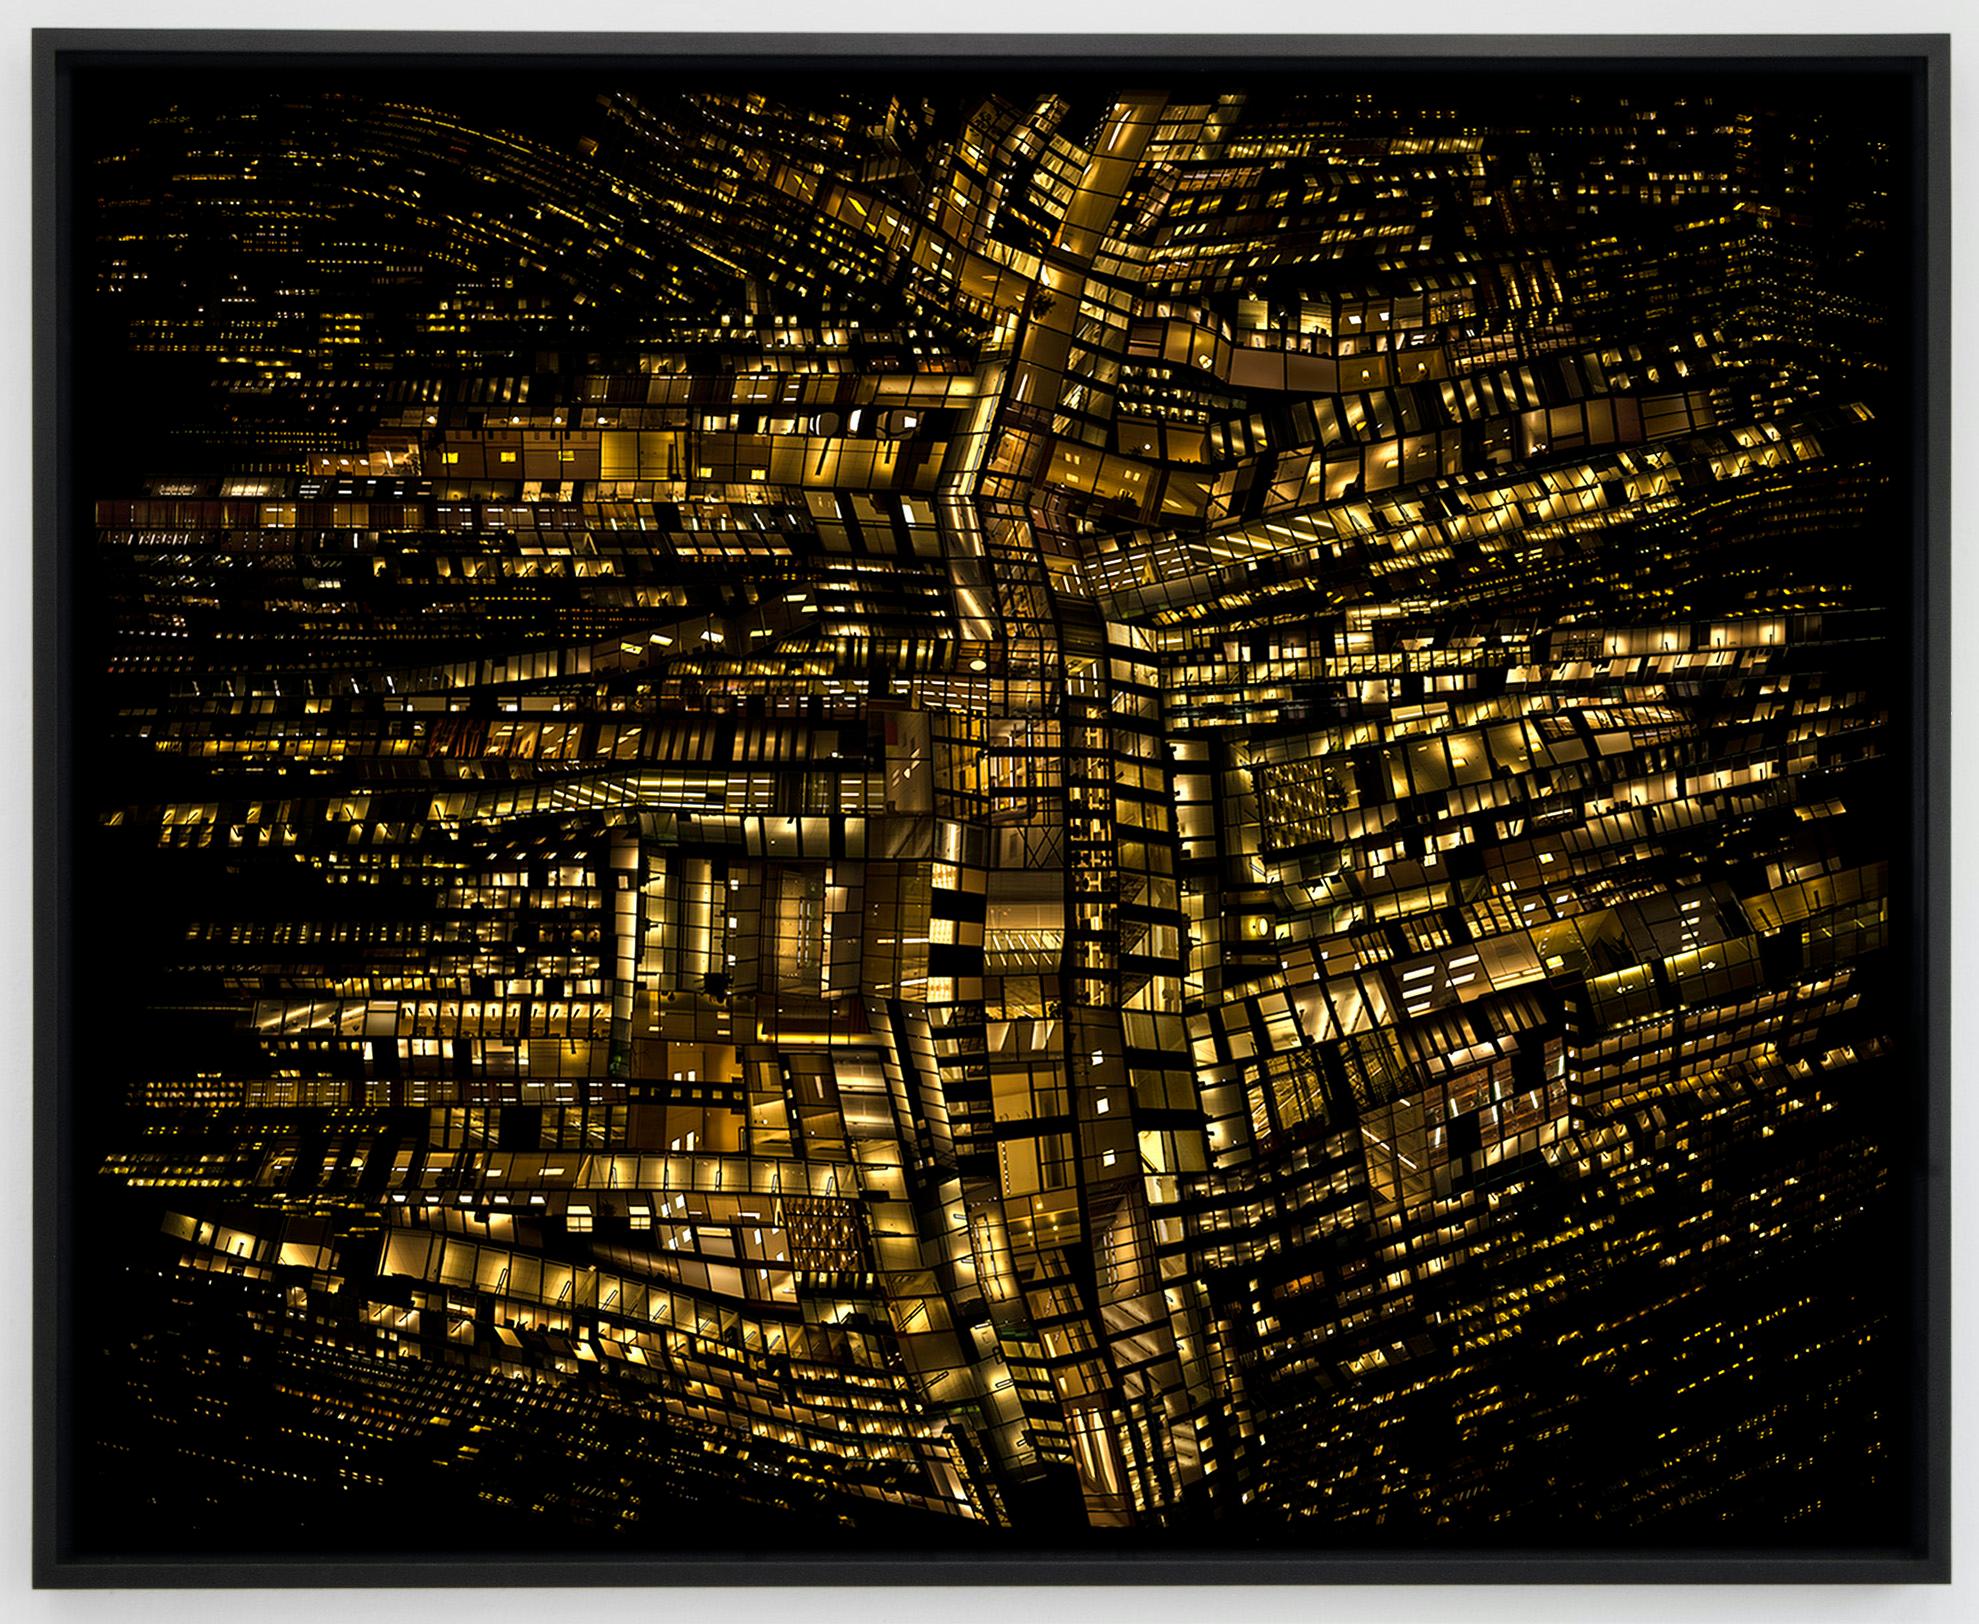 Urban Codes - Contemporary Abstract Architectural Color Amber Landscape Photography
Lichtdiagramm 03
Edition 2/3 + 1 AP
Photo print will be shipped with an adhesive label signed by the artist

Hubert Blanz's artistic works mainly deal with urban